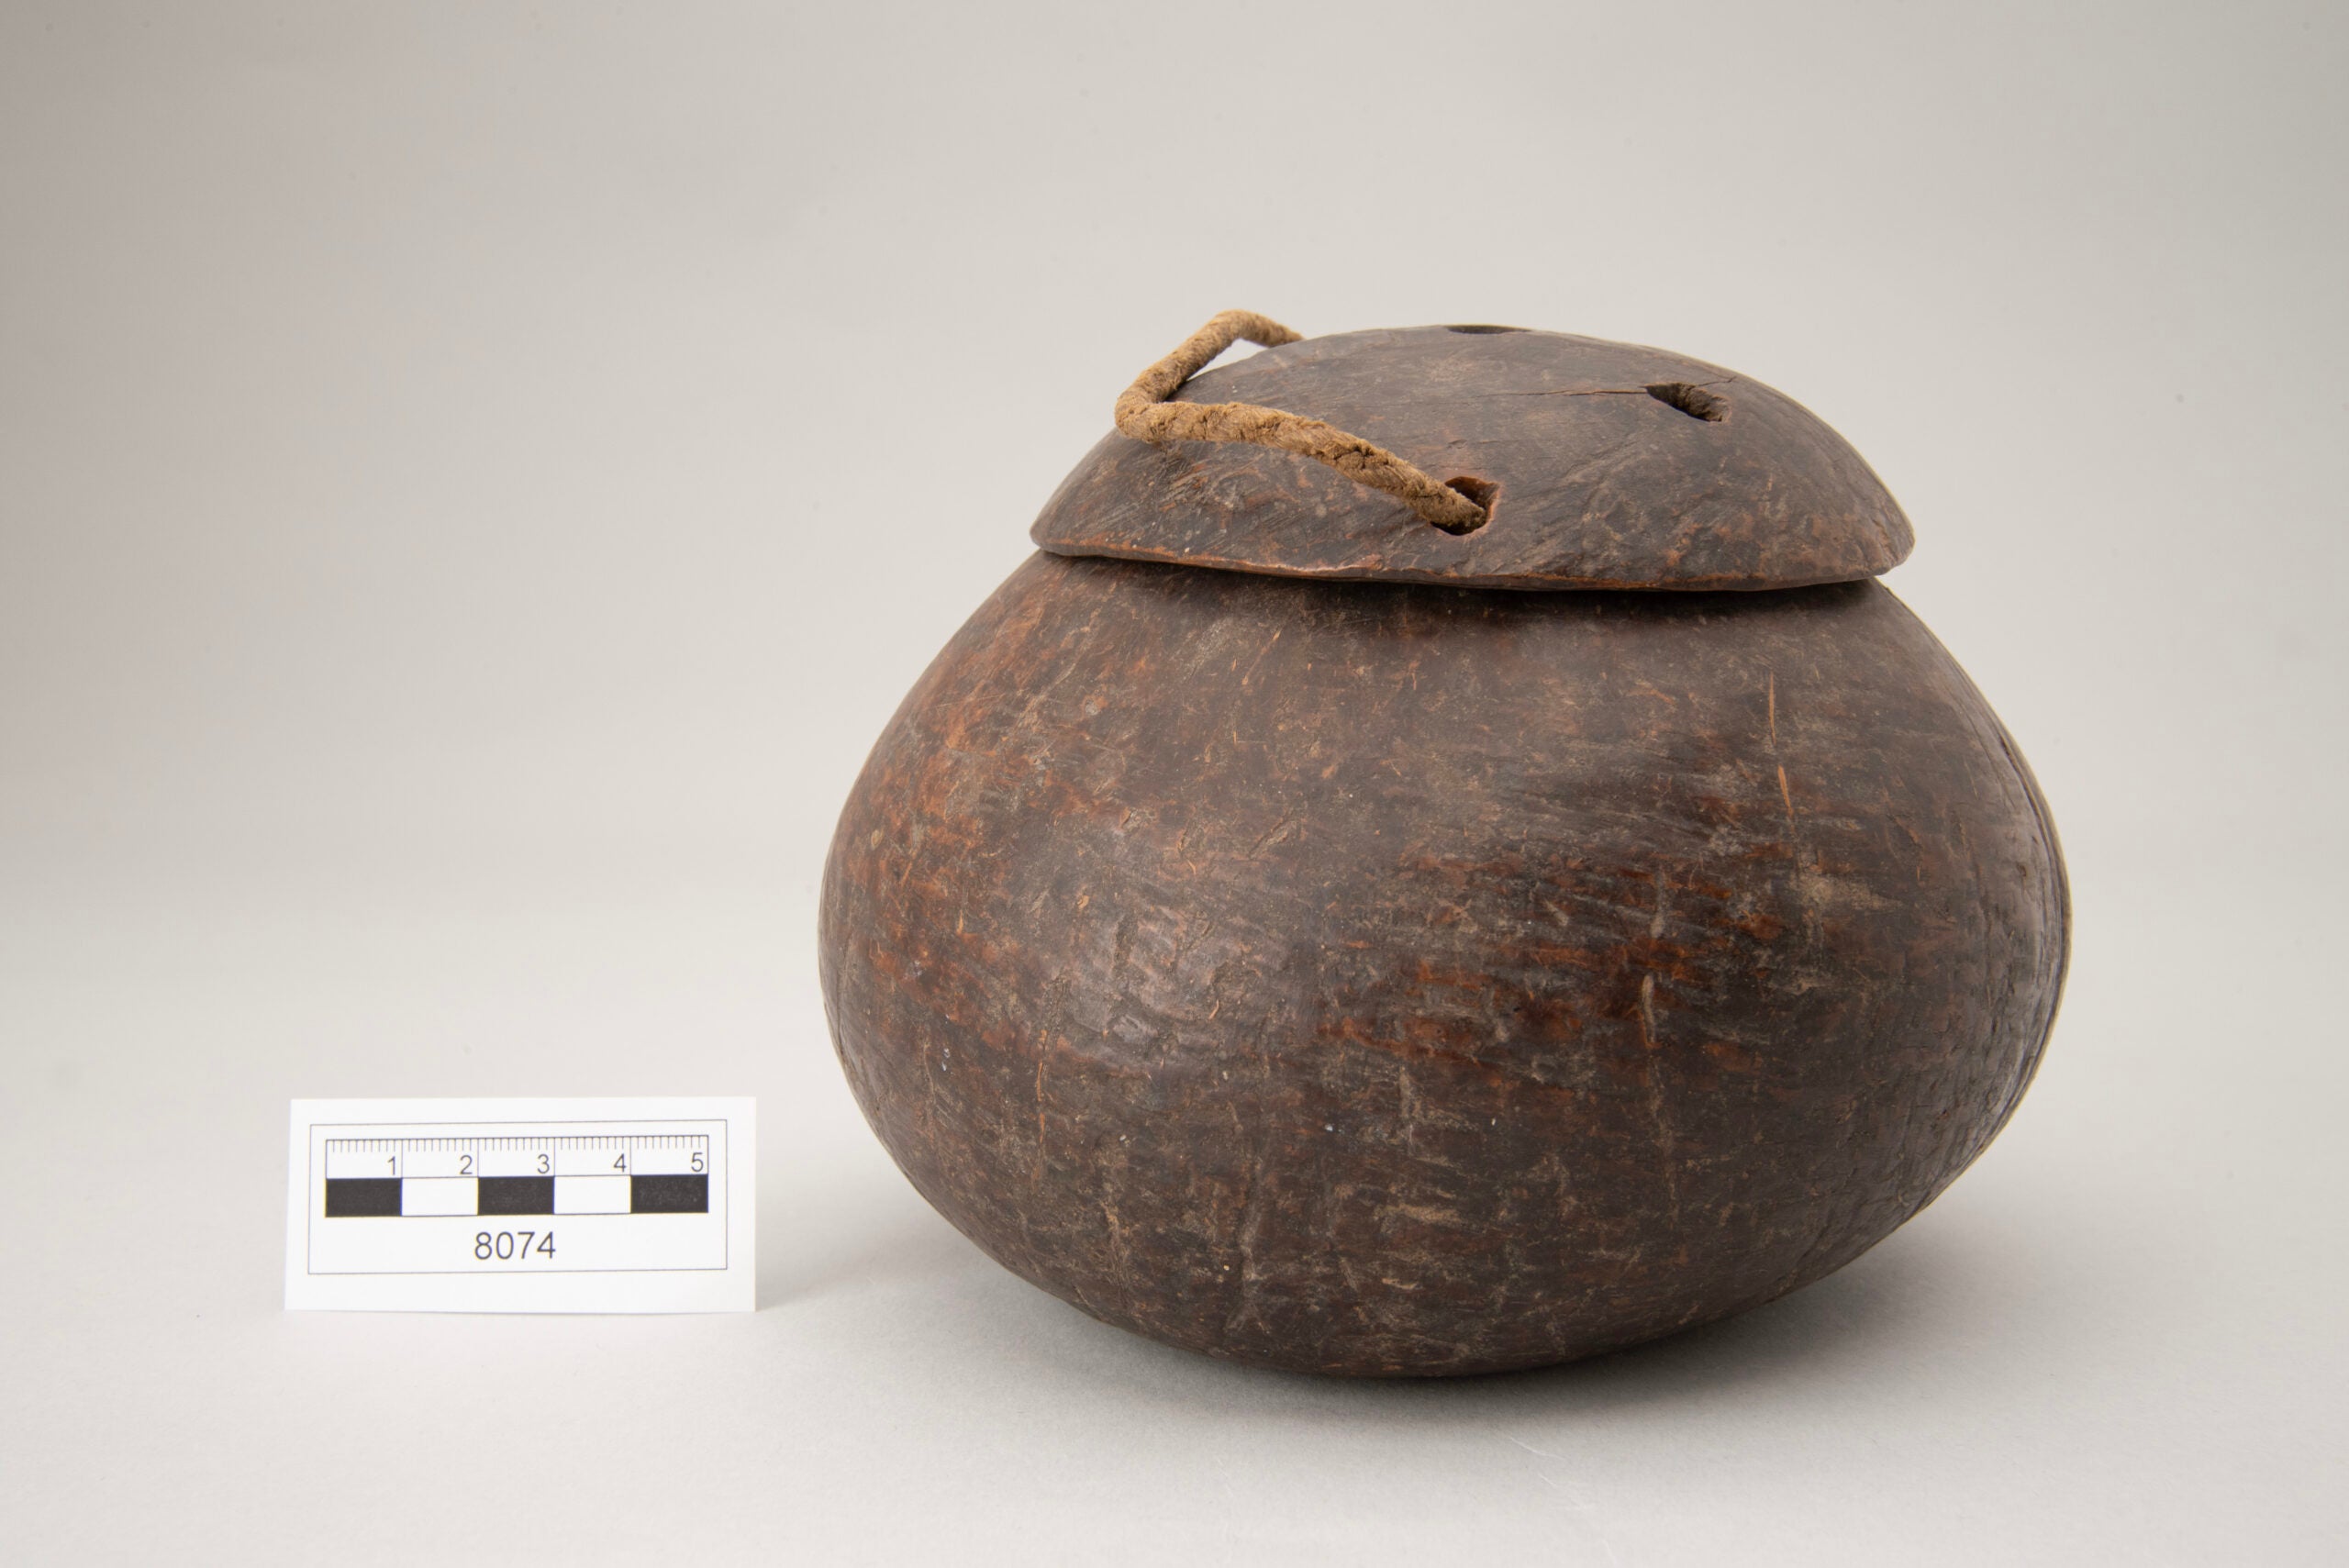 A container made out of out a coconut shell, with its lid on, seen from the side. The lid sits properly on the top of the container. It looks like a coconut from the side.